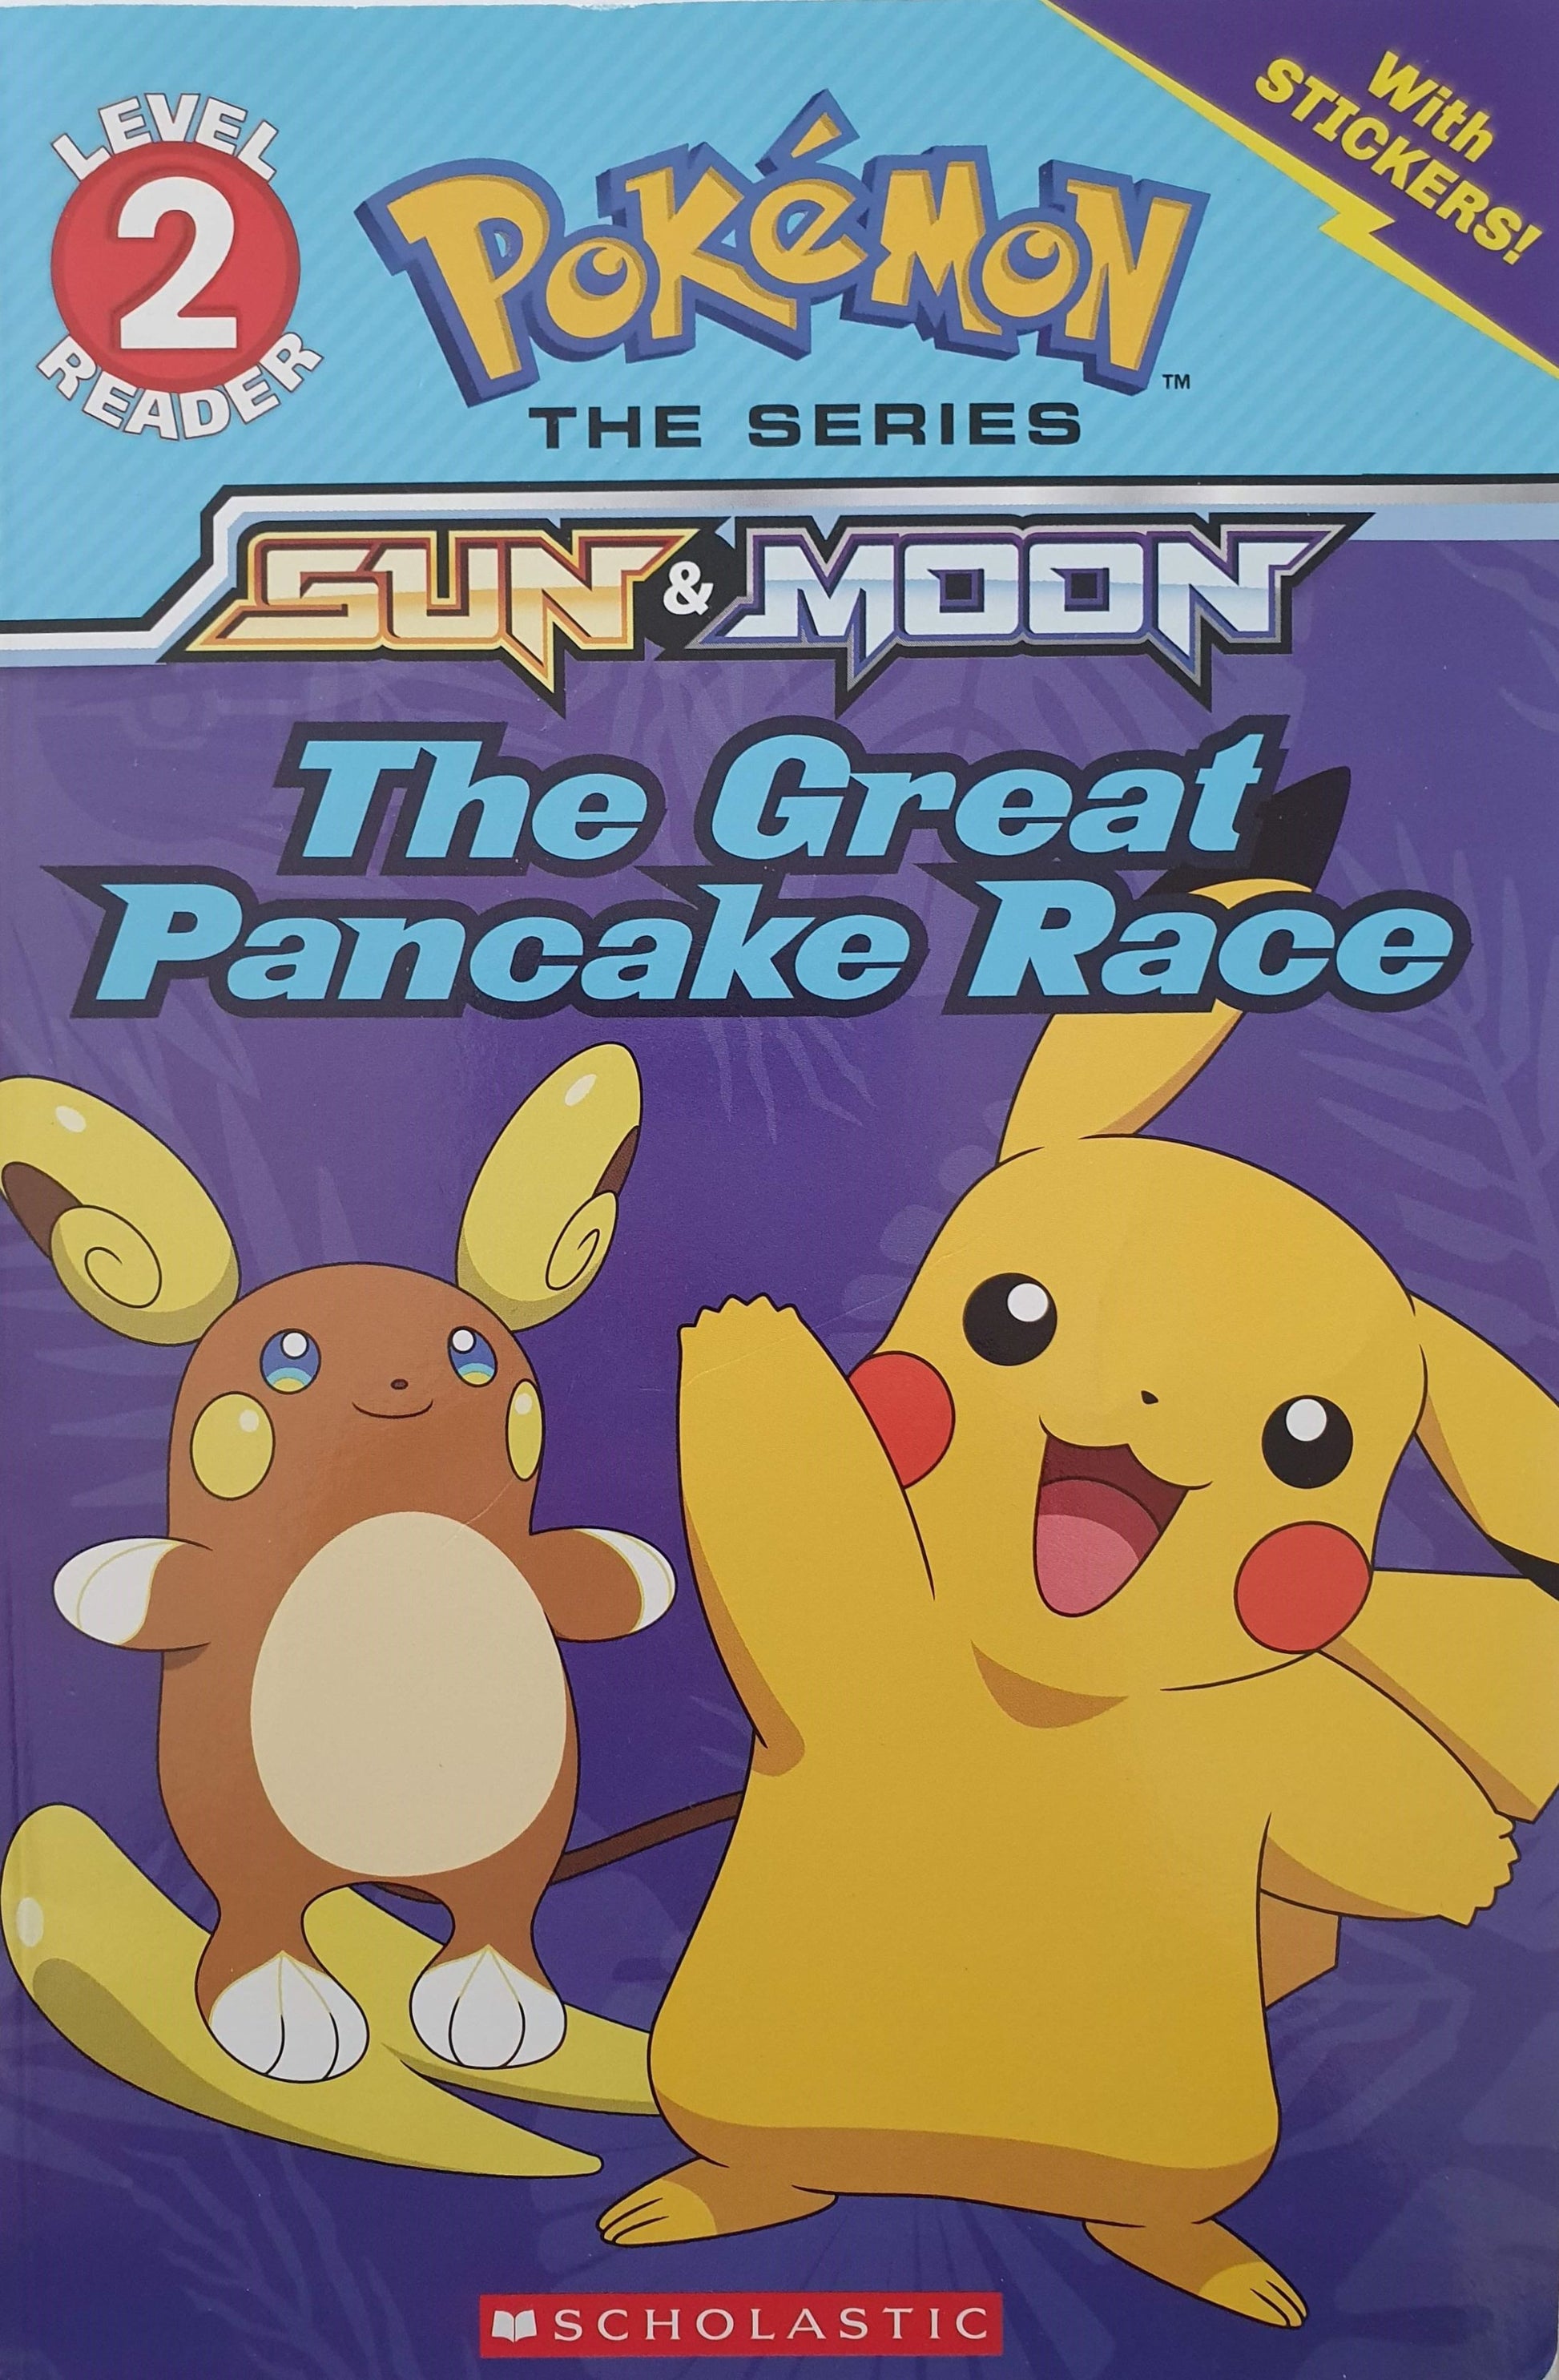 Pokémon-Sun and Moon-The great pancake race Like New Not Applicable  (4600971853879)